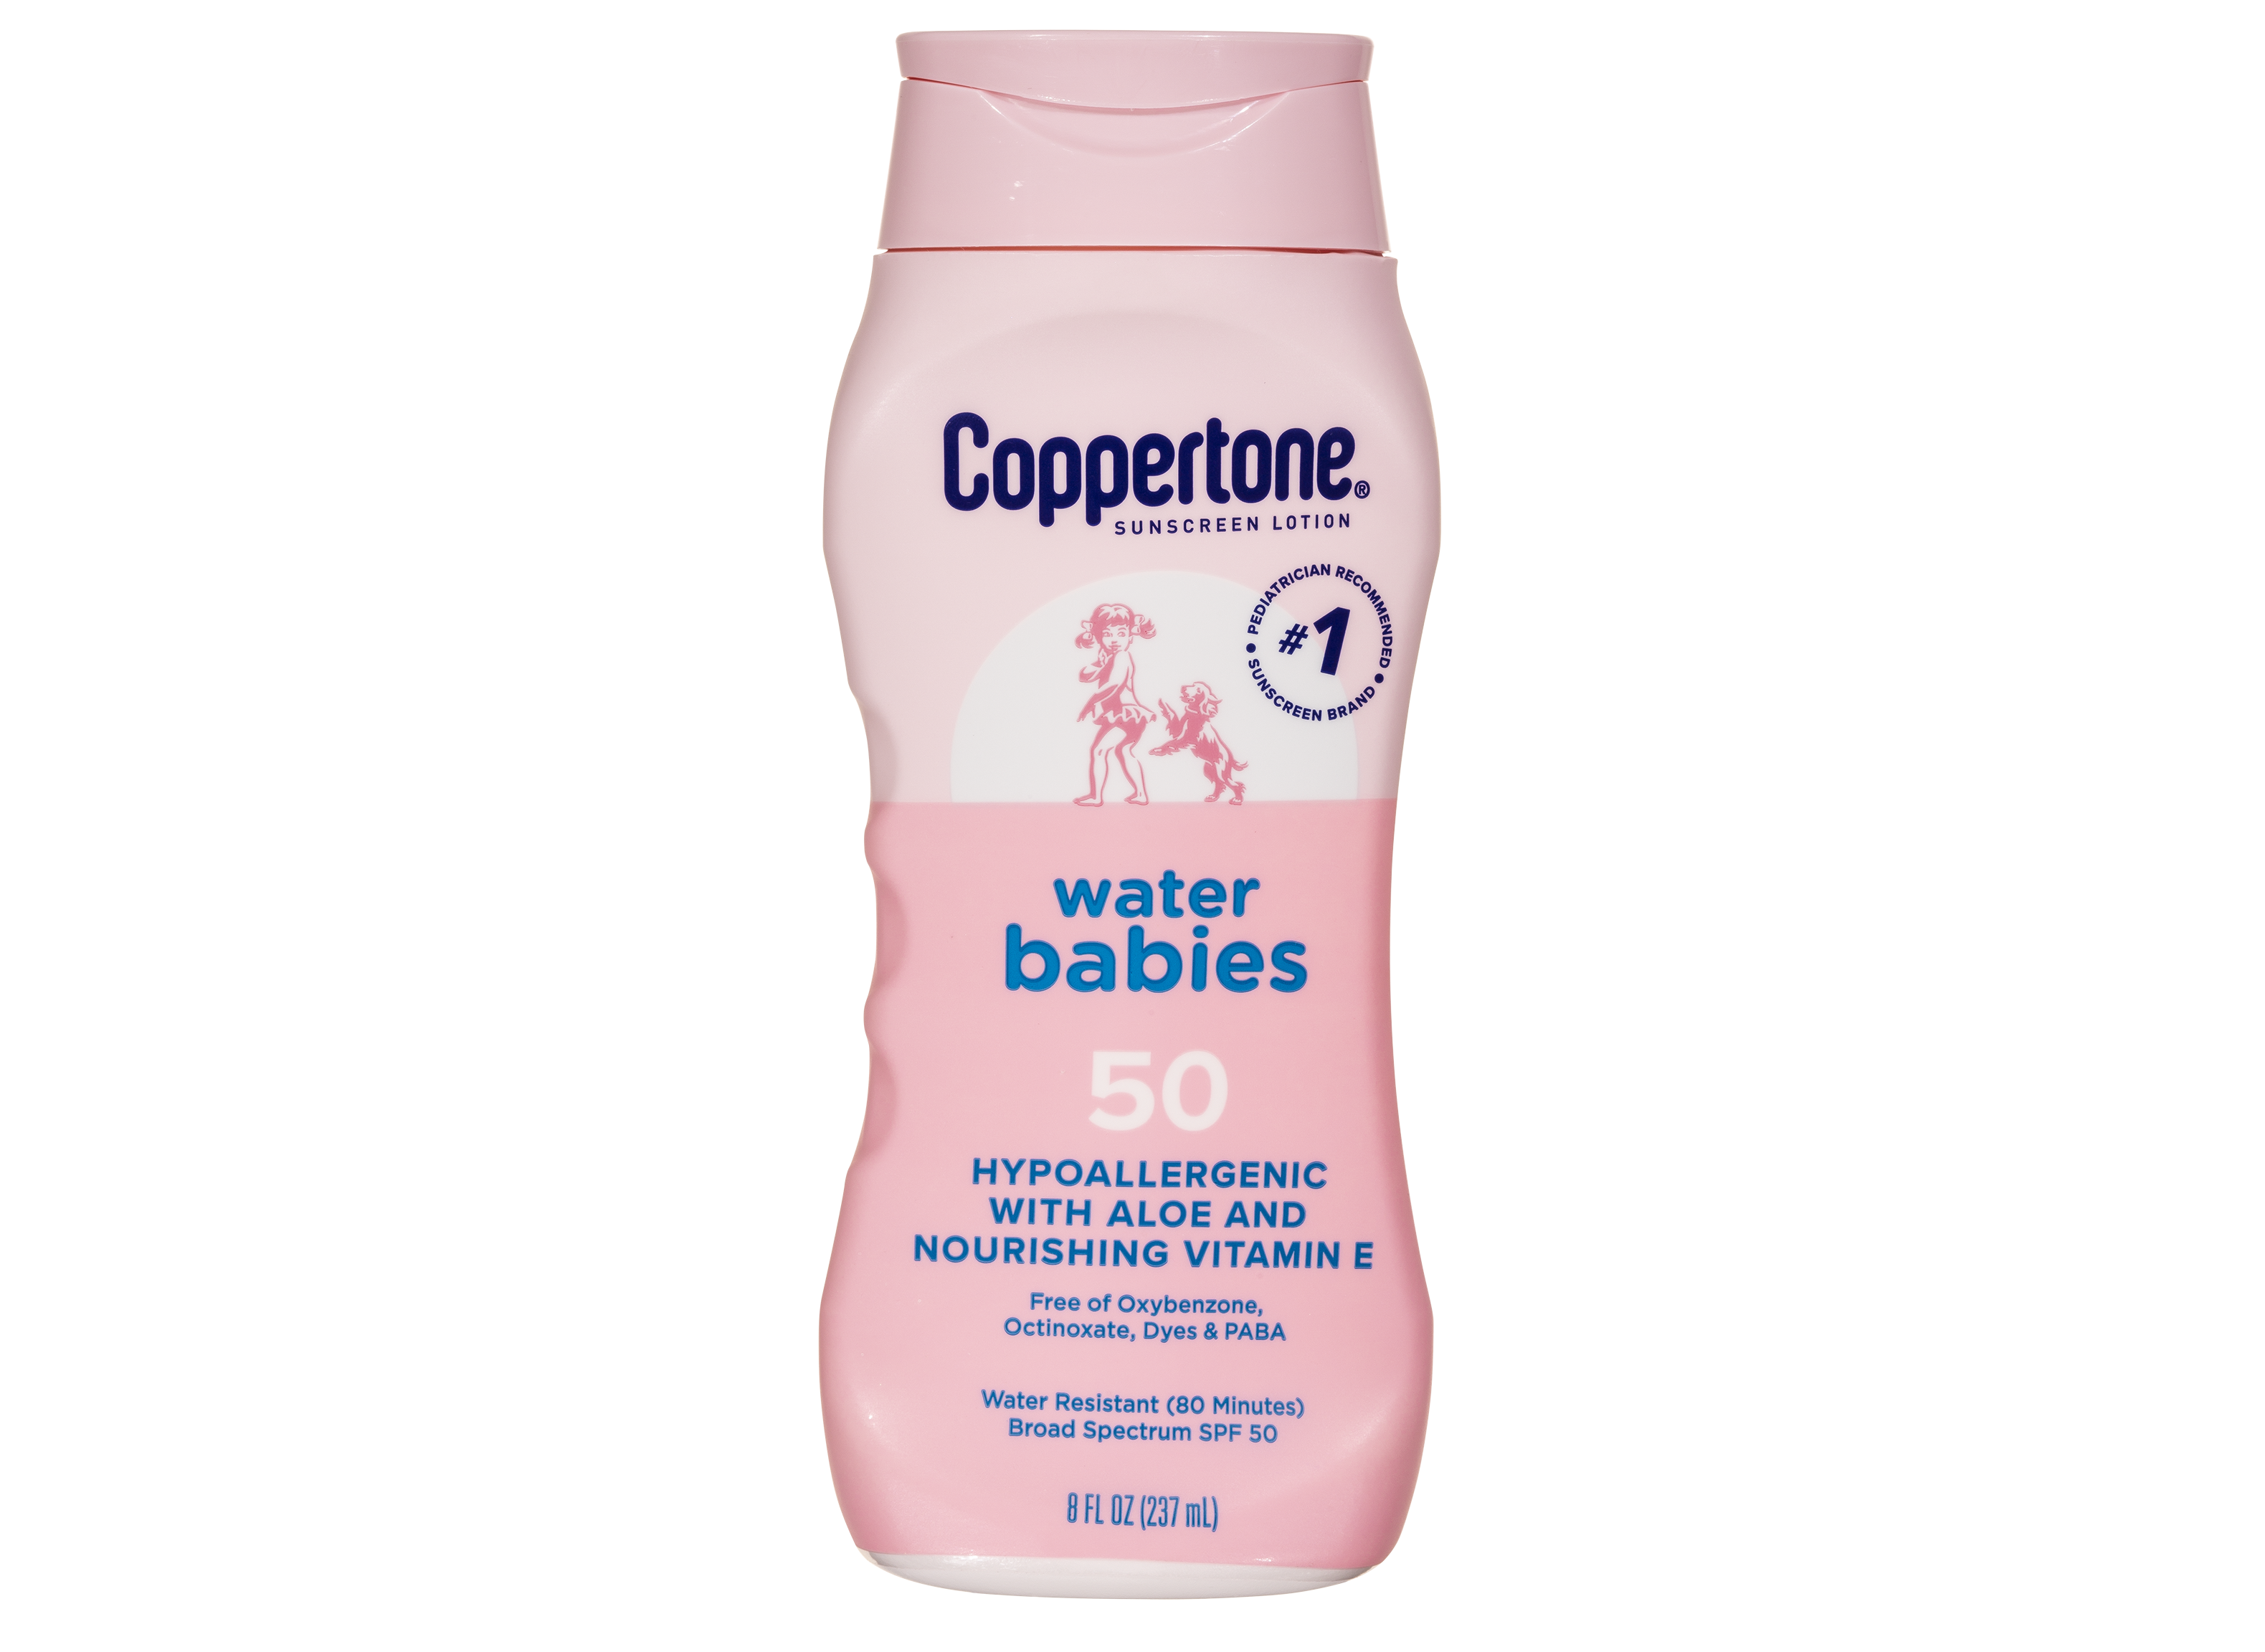 Coppertone Water Babies Lotion SPF 50 Sunscreen Review Consumer Reports